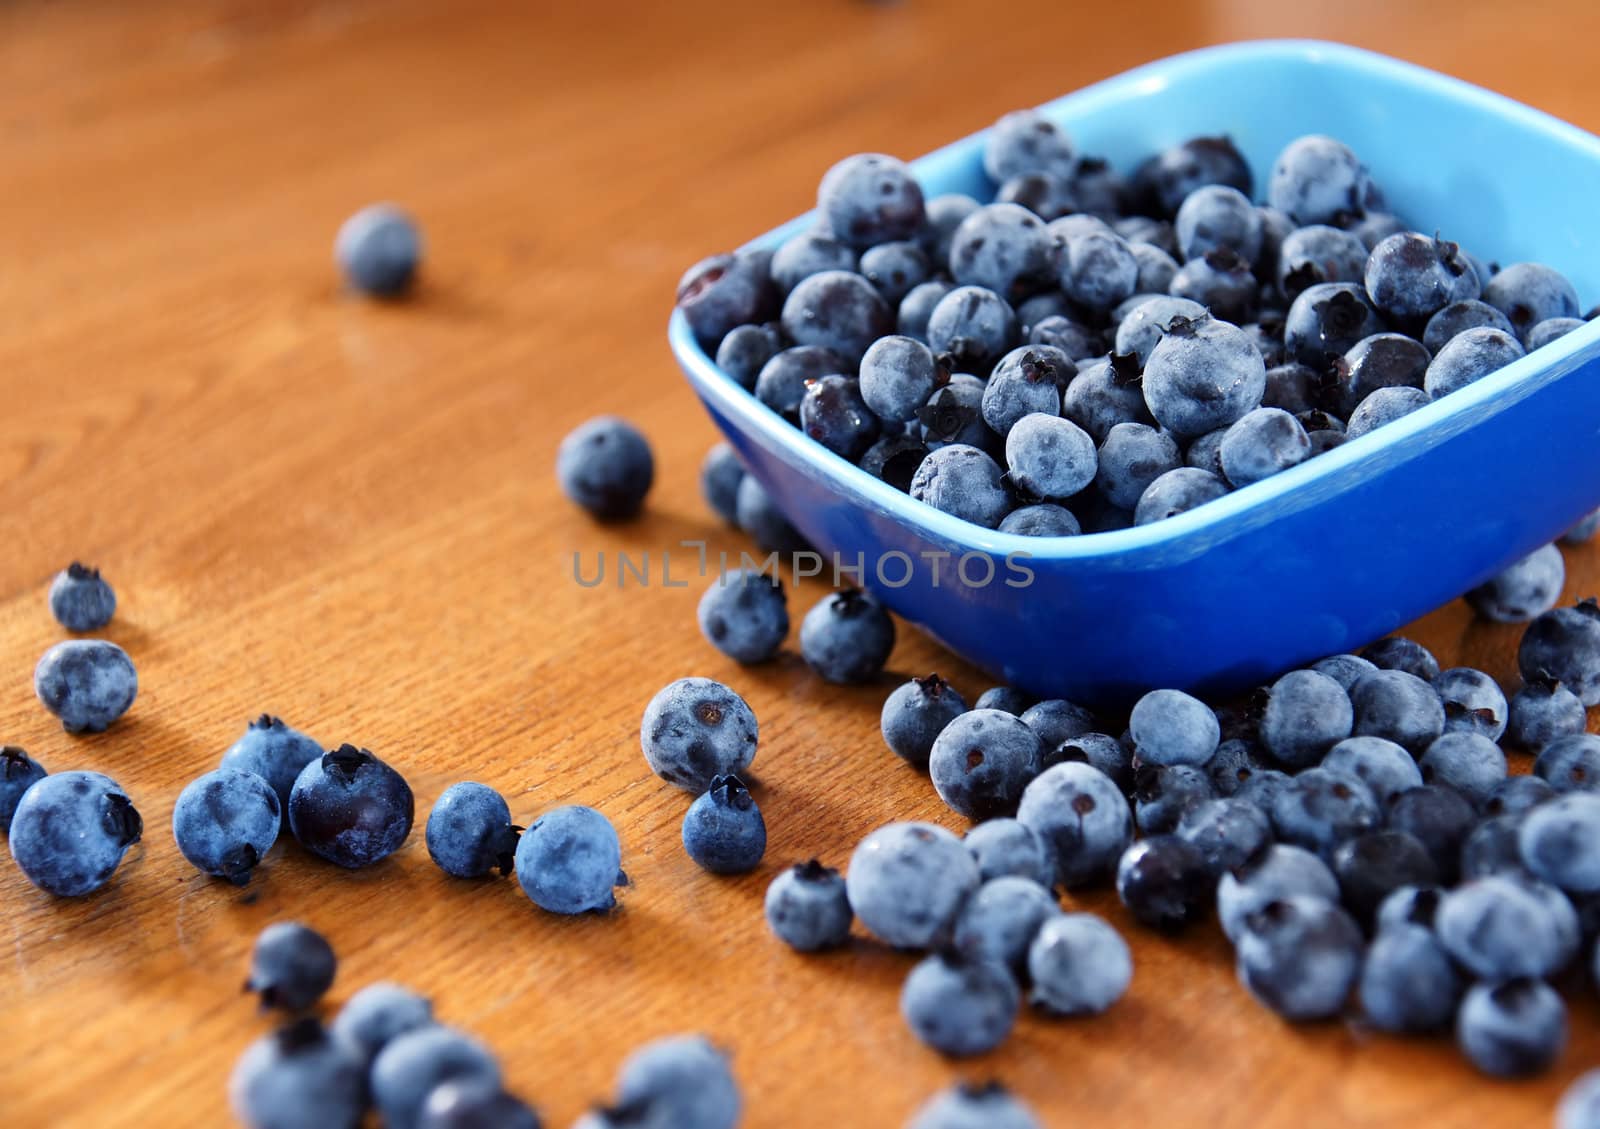 Yummy wild blueberries simply served in a small blue dish and spilled on the wooden kitchen table.